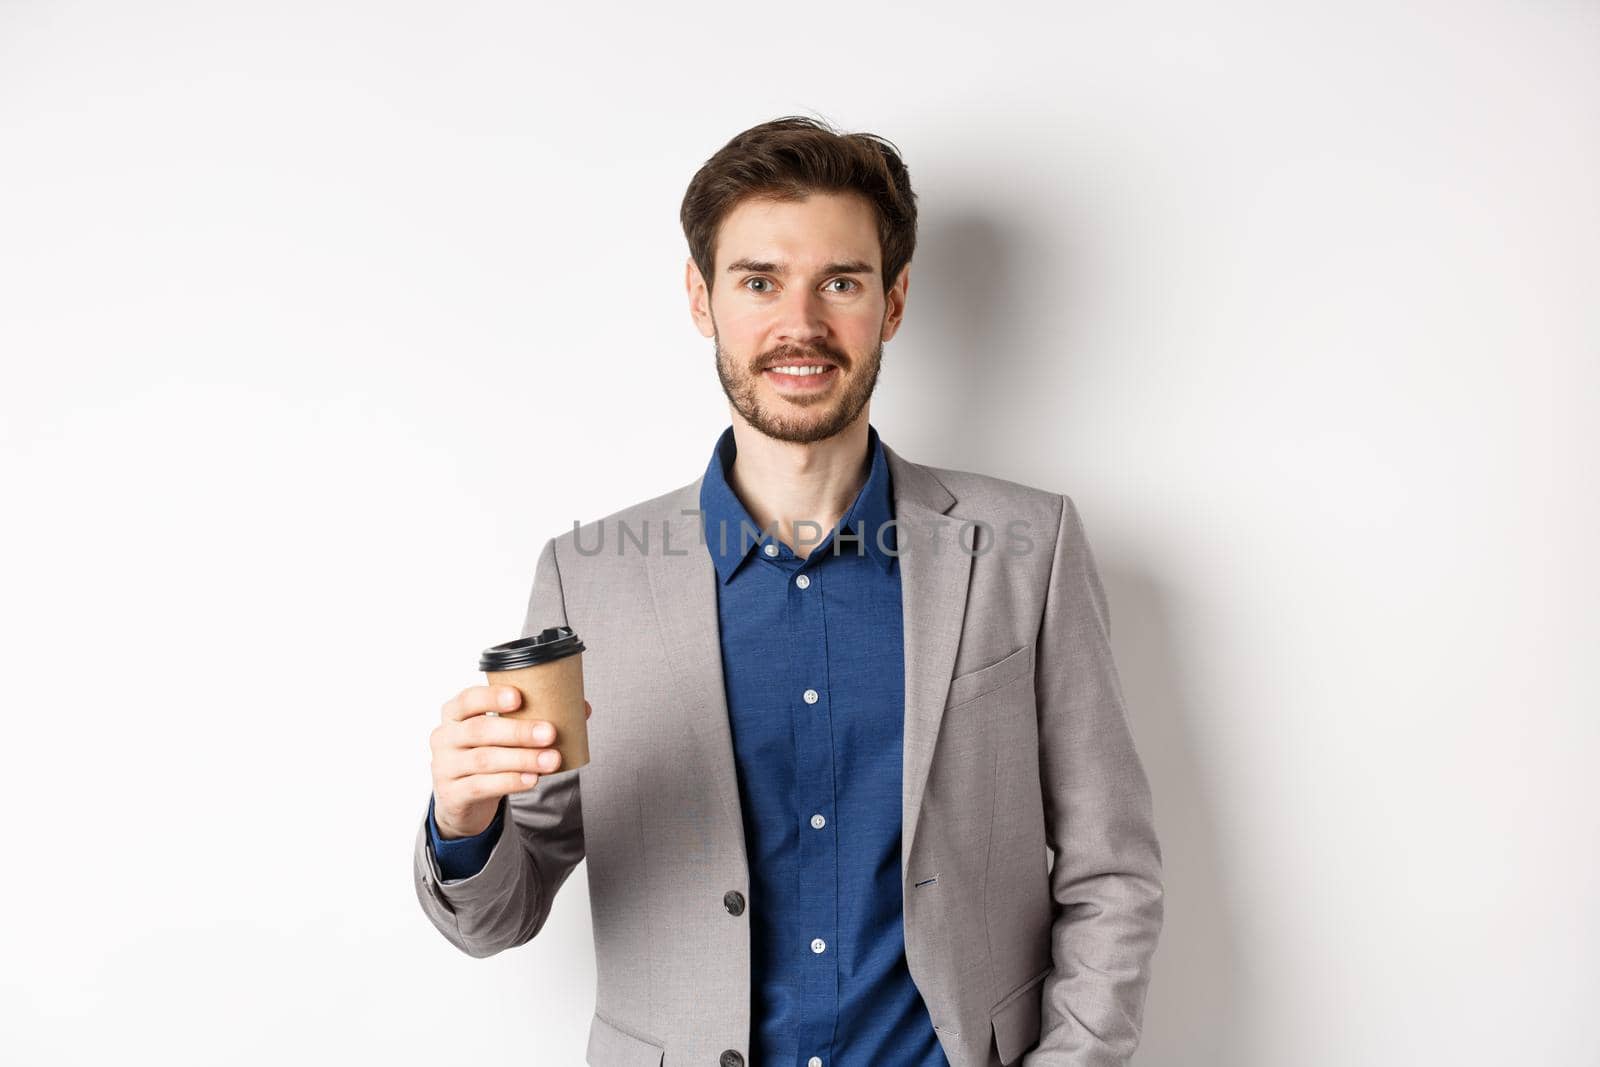 Smiling office worker in suit drinking coffee from paper cup, having break after work at cafe, standing against white background.